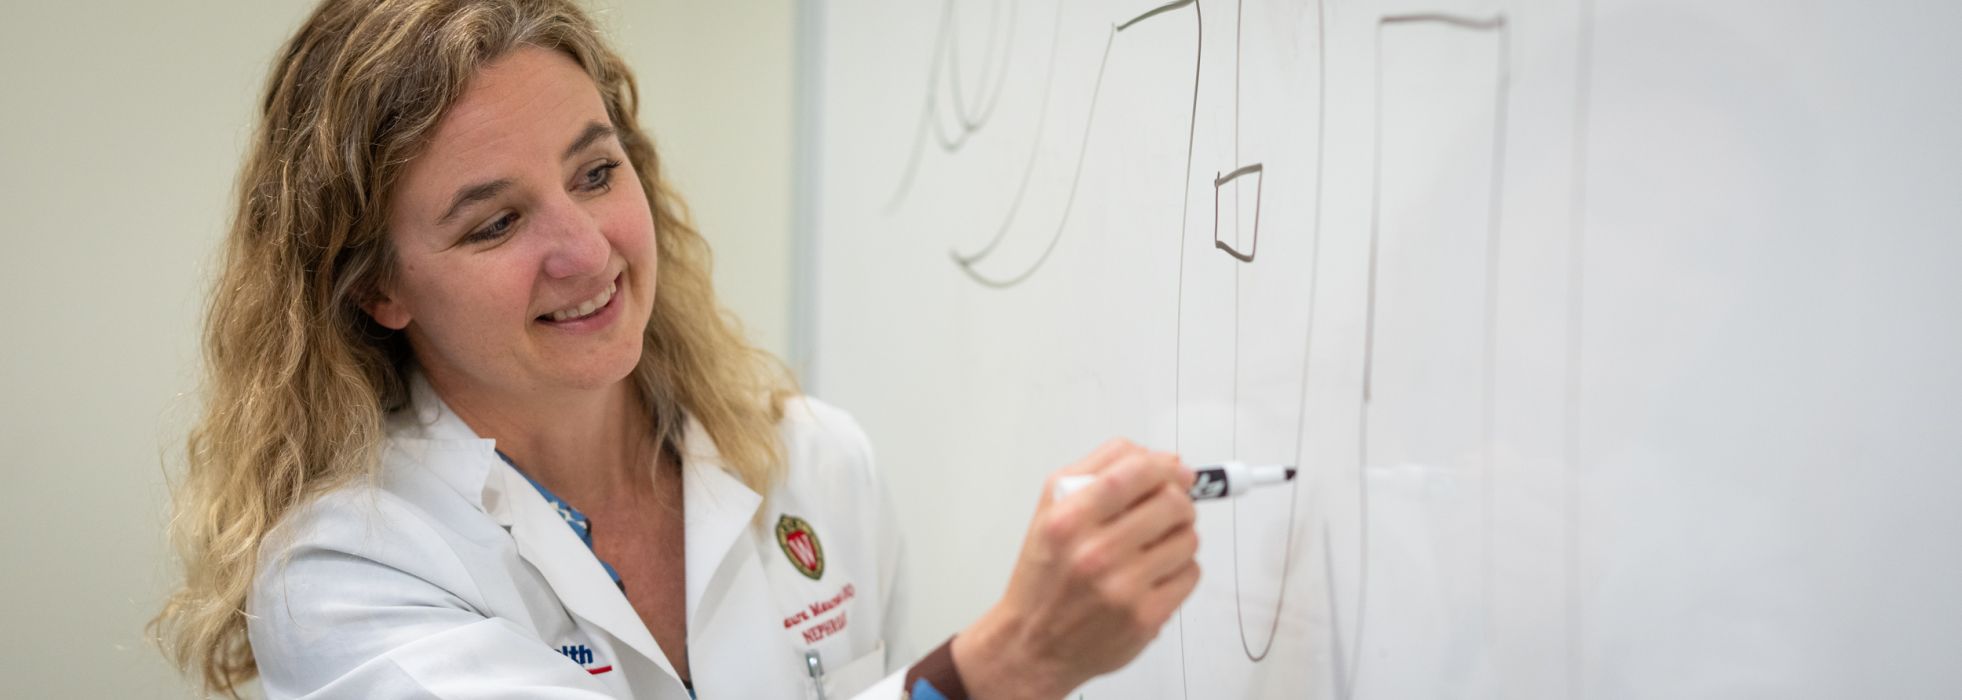 Dr. Laura Maursetter wearing a lab coat and writing on a white board